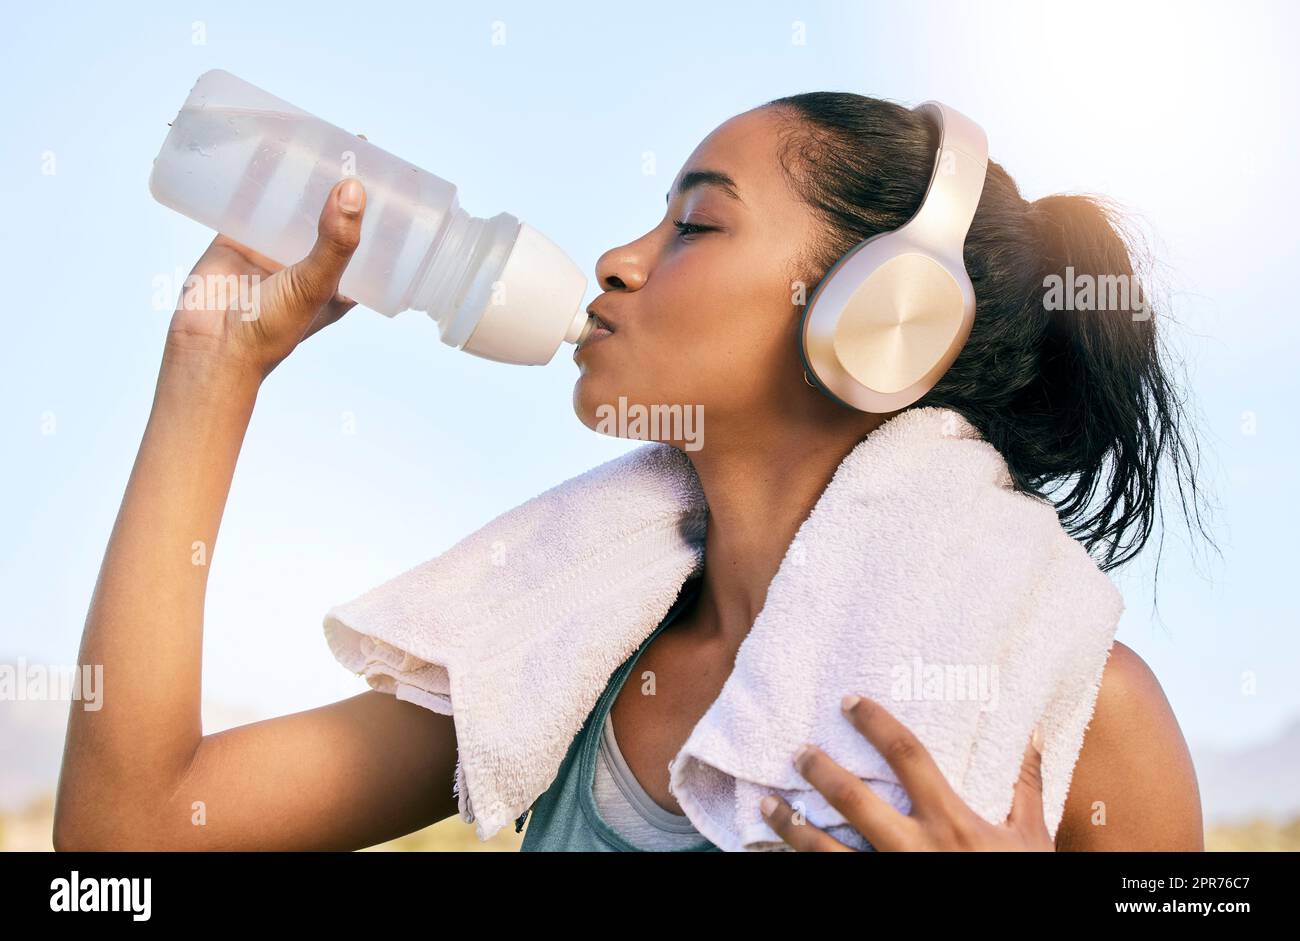 Young Fitness Women With Water Bottles Focus On The Bottles Stock